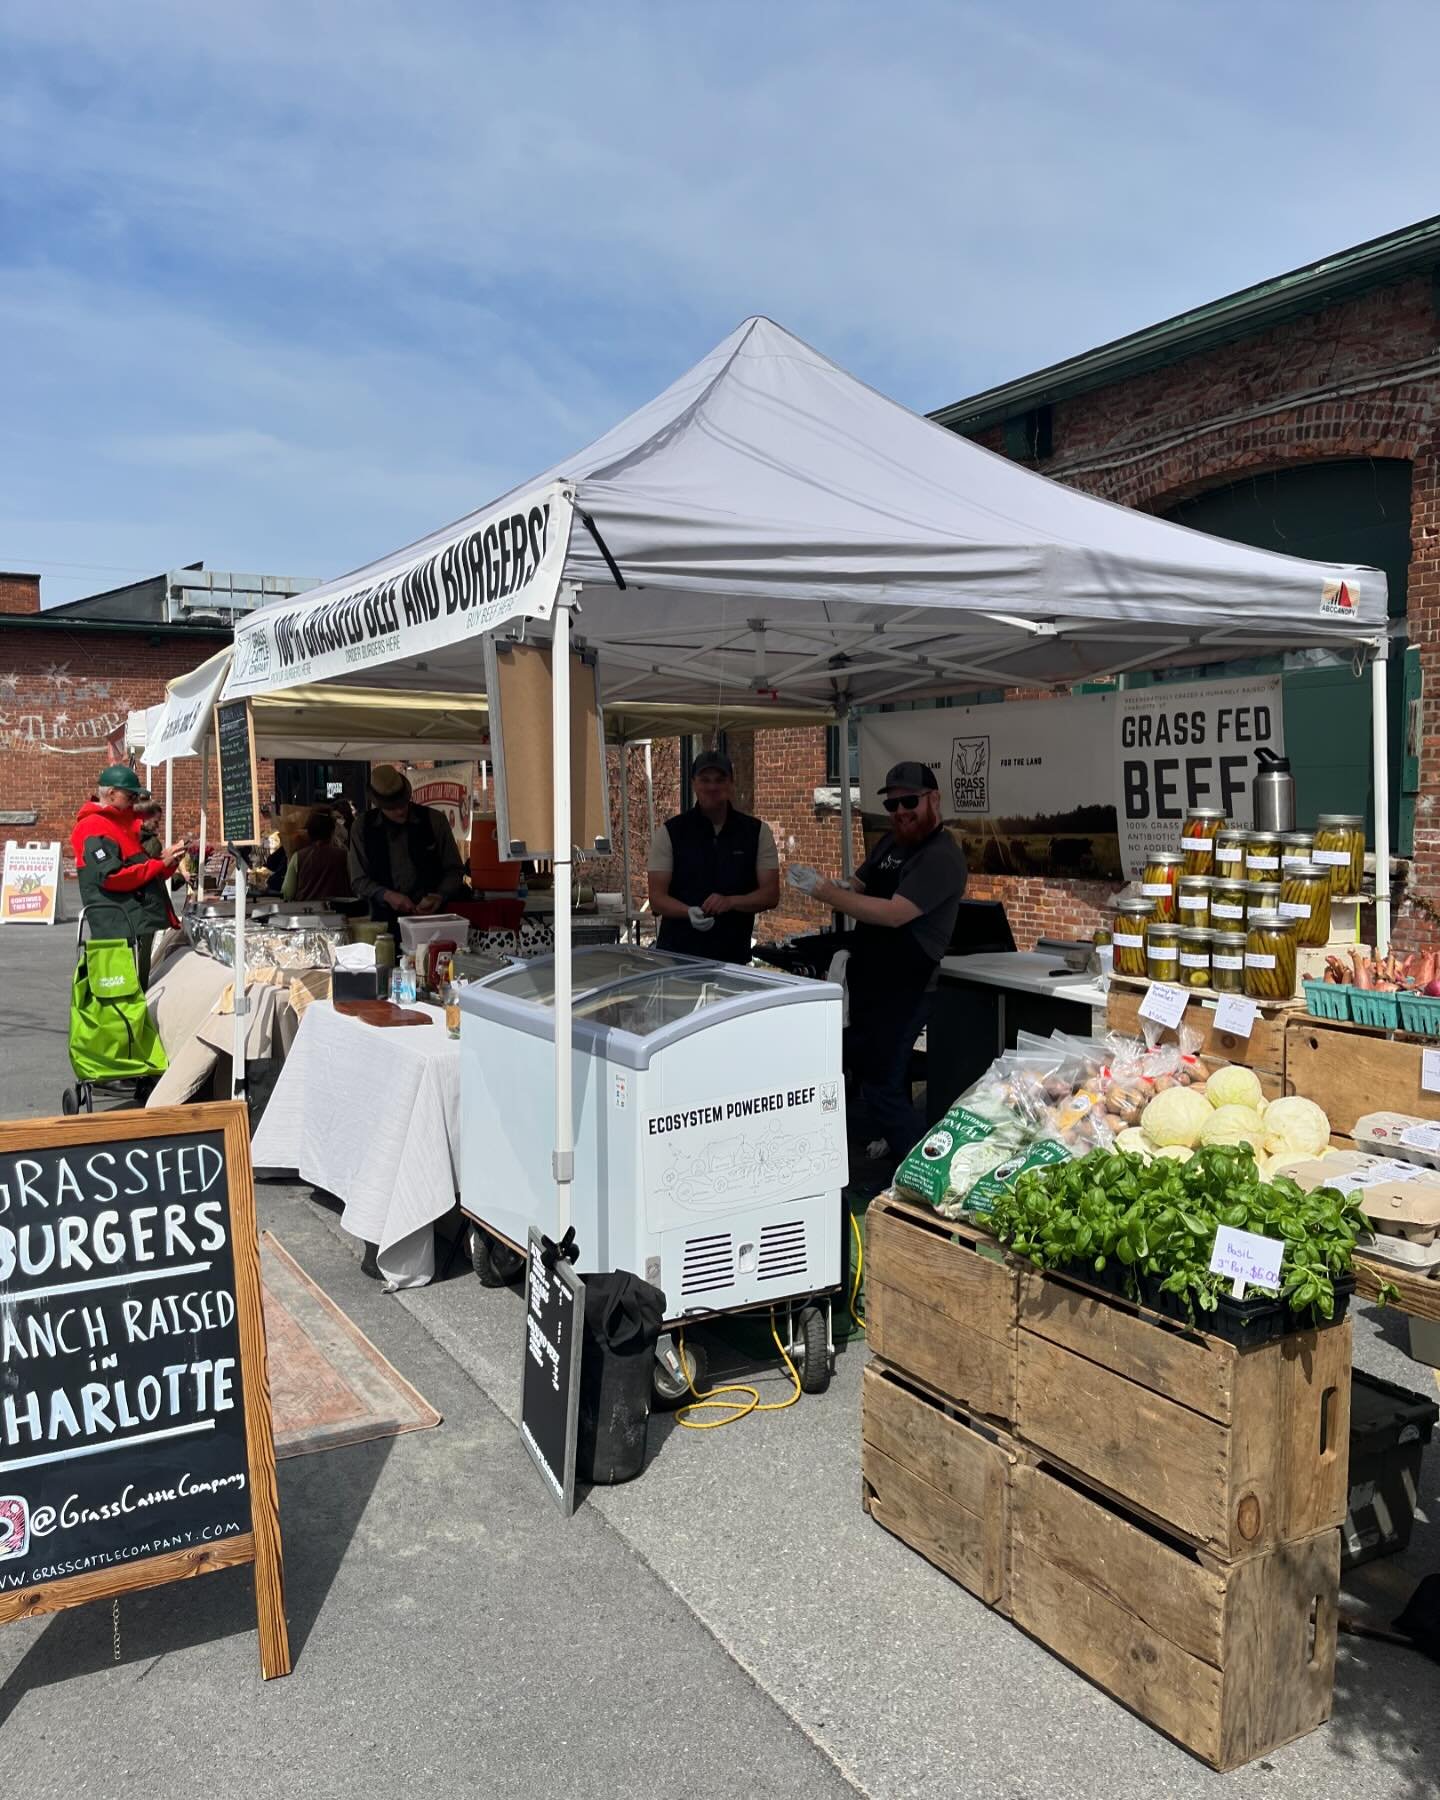 HAPPENING NOW! For the next 3 hours and 3 hours only come down to our very last market of the season @burlingtonbeer. We have warm weather and all the freshest, most beautiful and delicious products and produce for you to enjoy. 3, 2, 1&hellip;.let&r